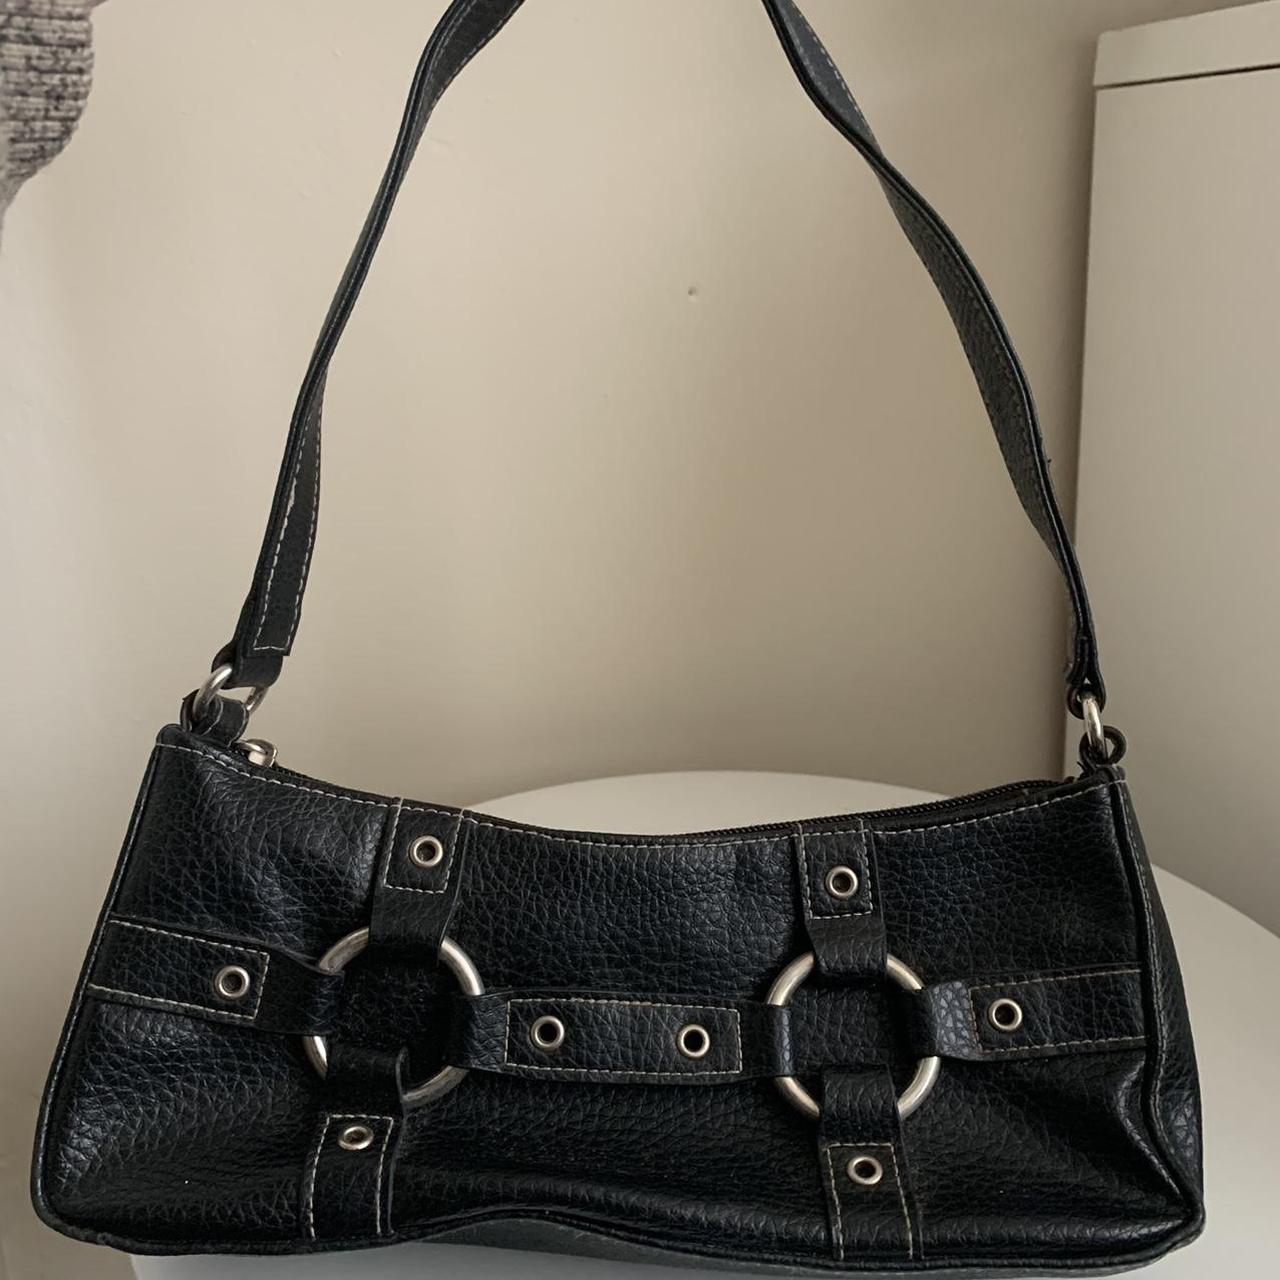 Gorgeous early 2000s handbag Black leather with... - Depop